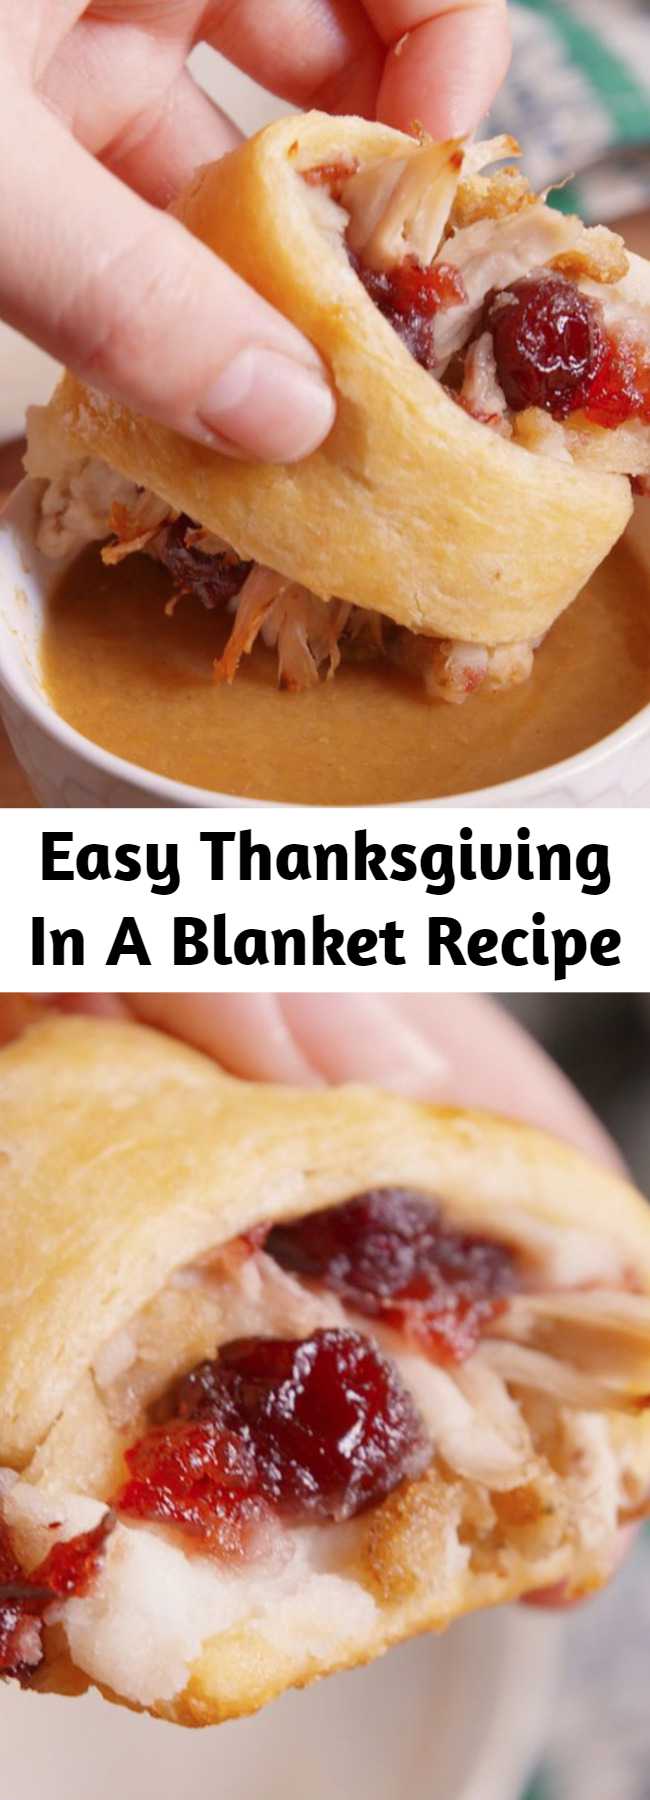 Easy Thanksgiving In A Blanket Recipe - Thanksgiving in a blanket is the most delicious thing you can do with your leftovers. This will be your new favorite sandwich. Crescent Rolls are everything bread will never be.